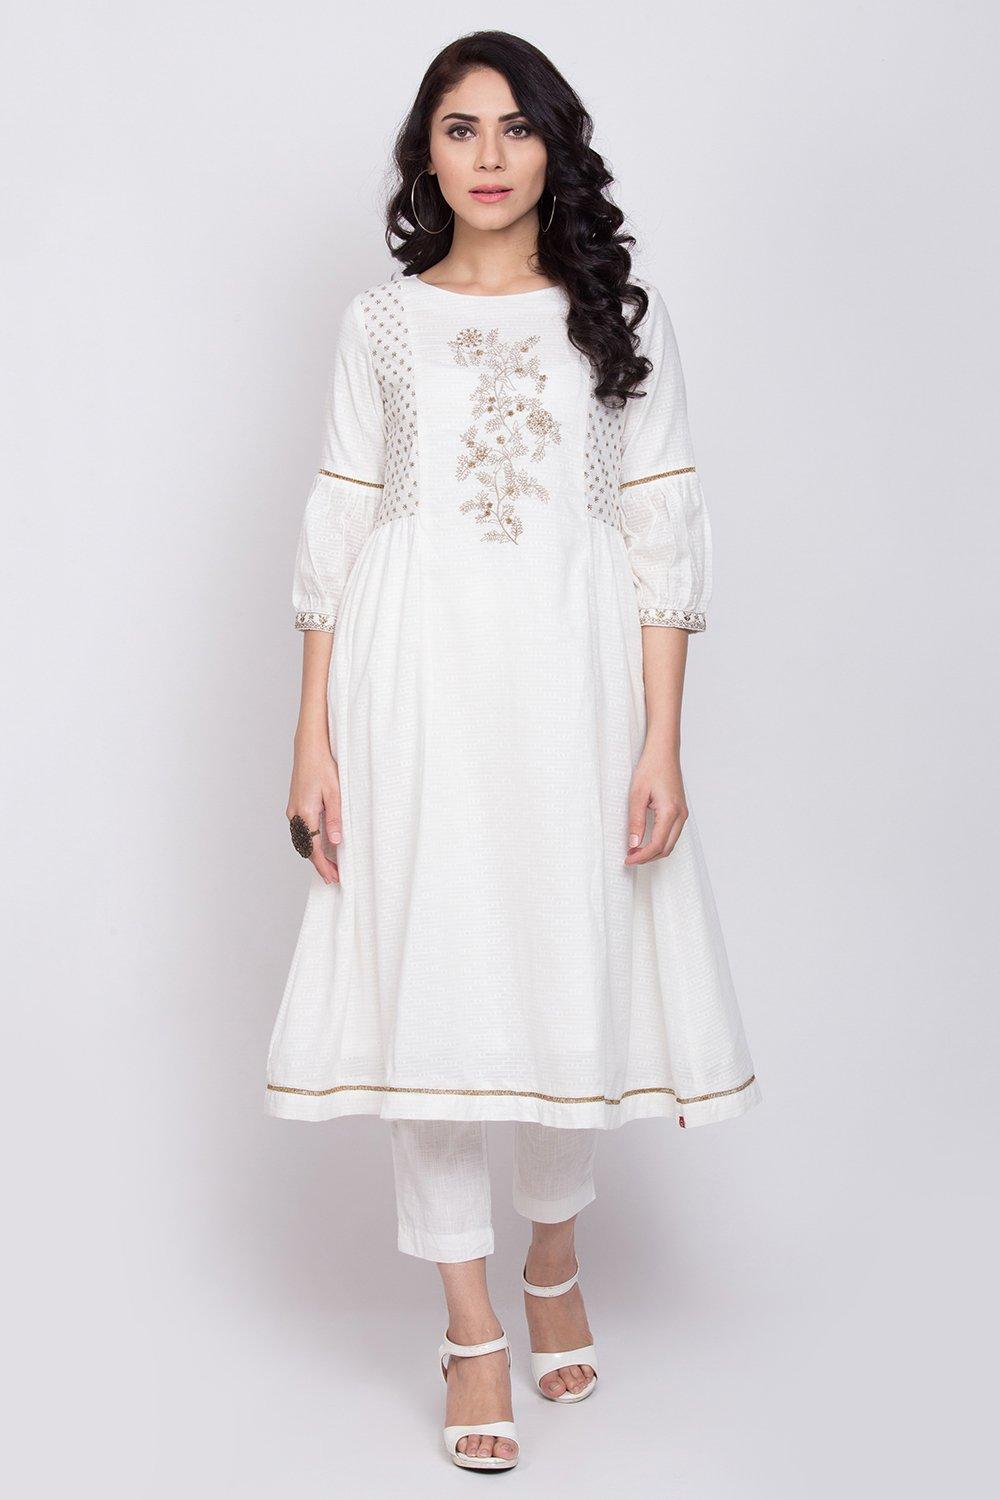 Buy Online Off White Cotton A Line Kurta For Women And Girls At Best